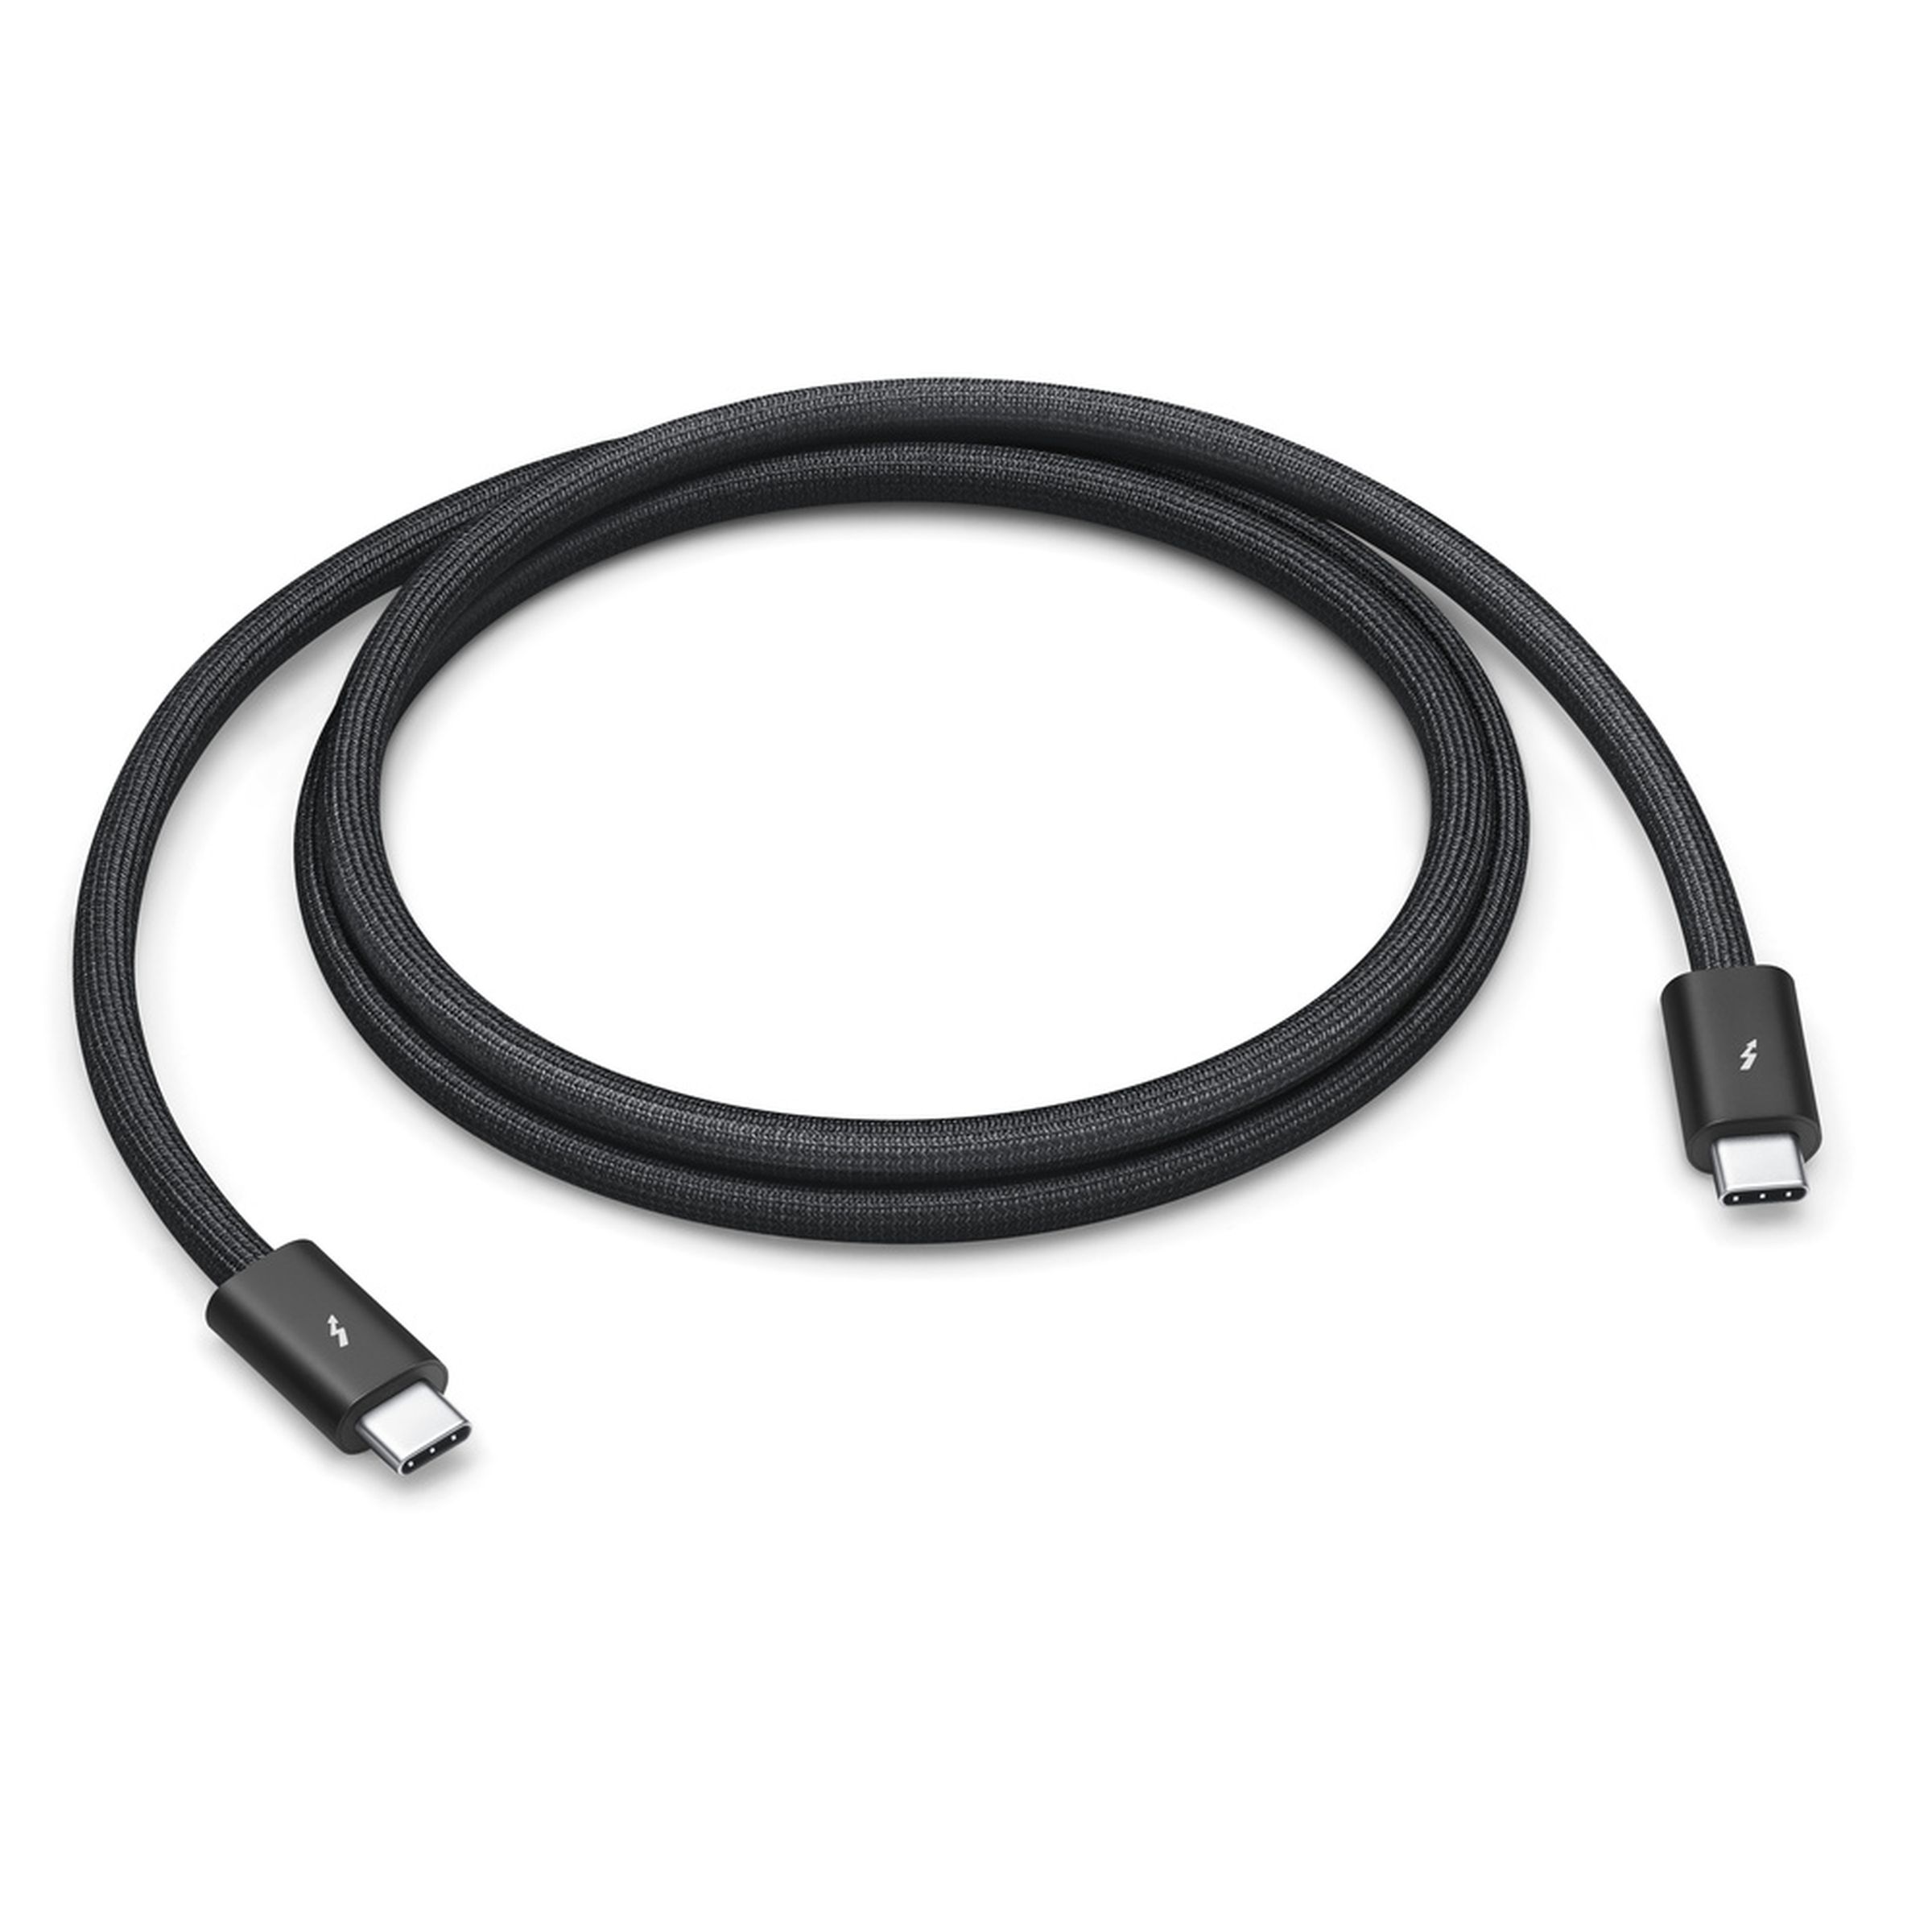 A picture of a coiled Apple Thunderbolt cable.